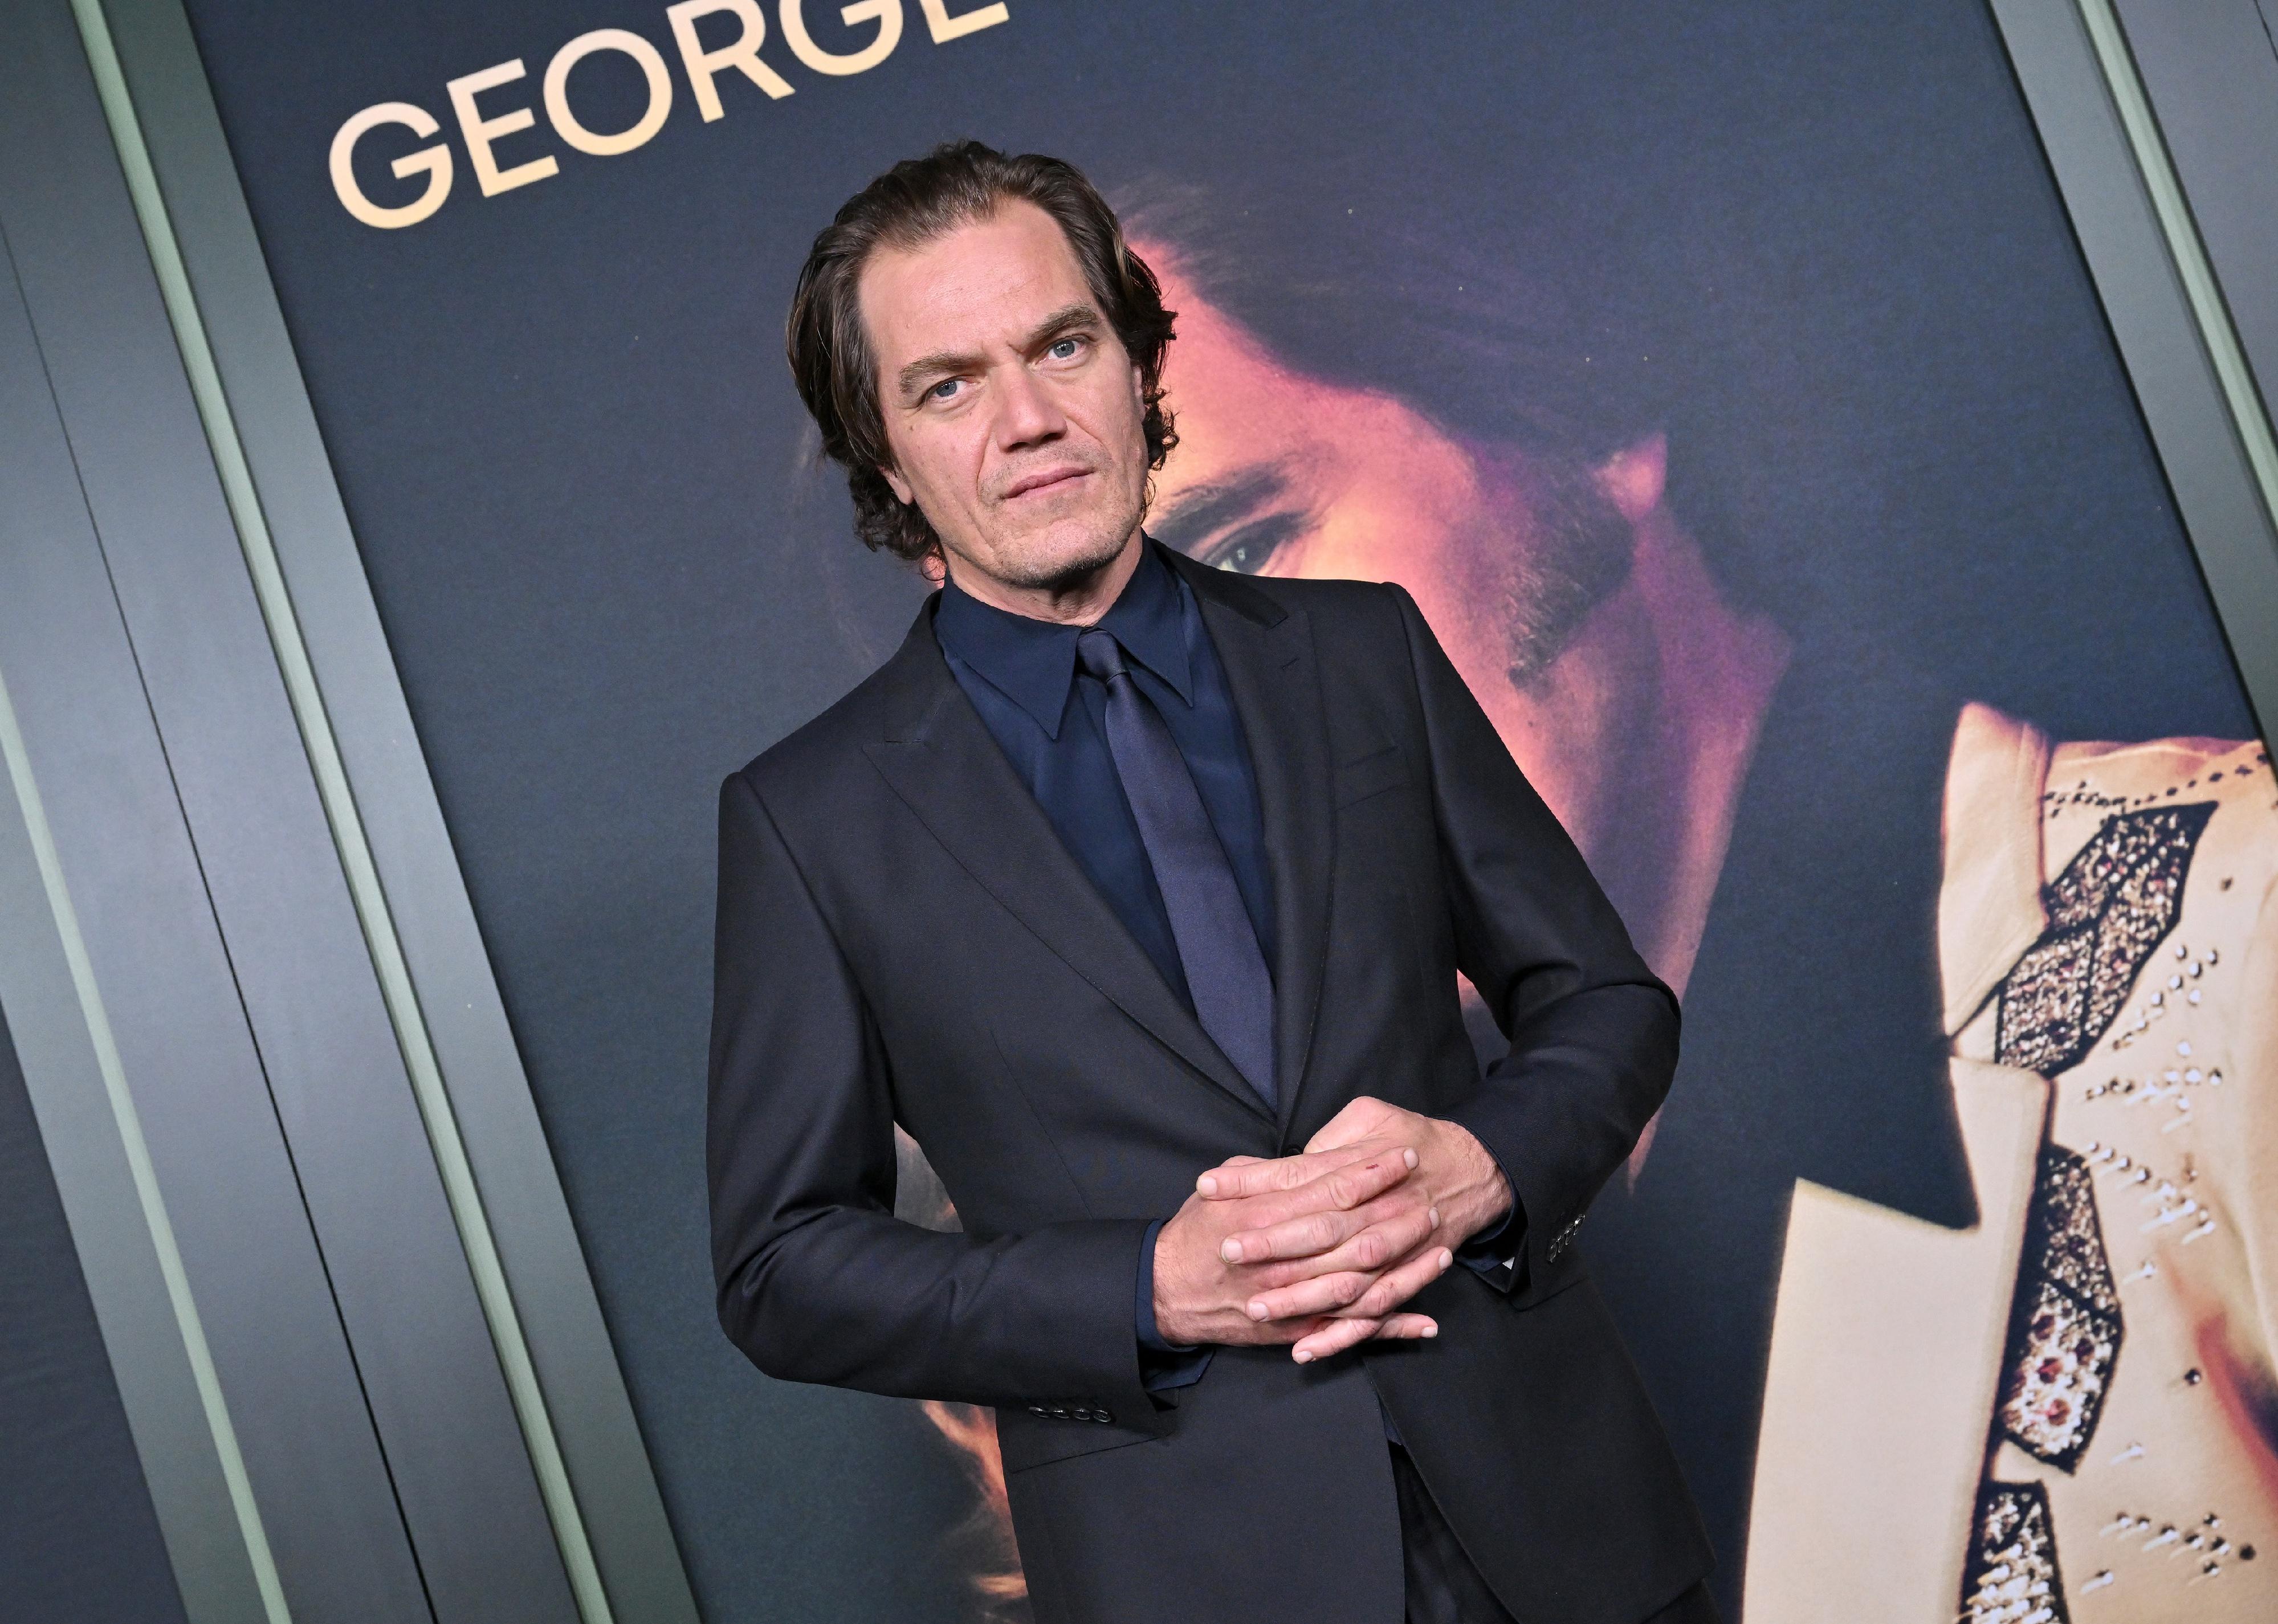 Michael Shannon attends Showtime's "George & Tammy" Premiere Event.